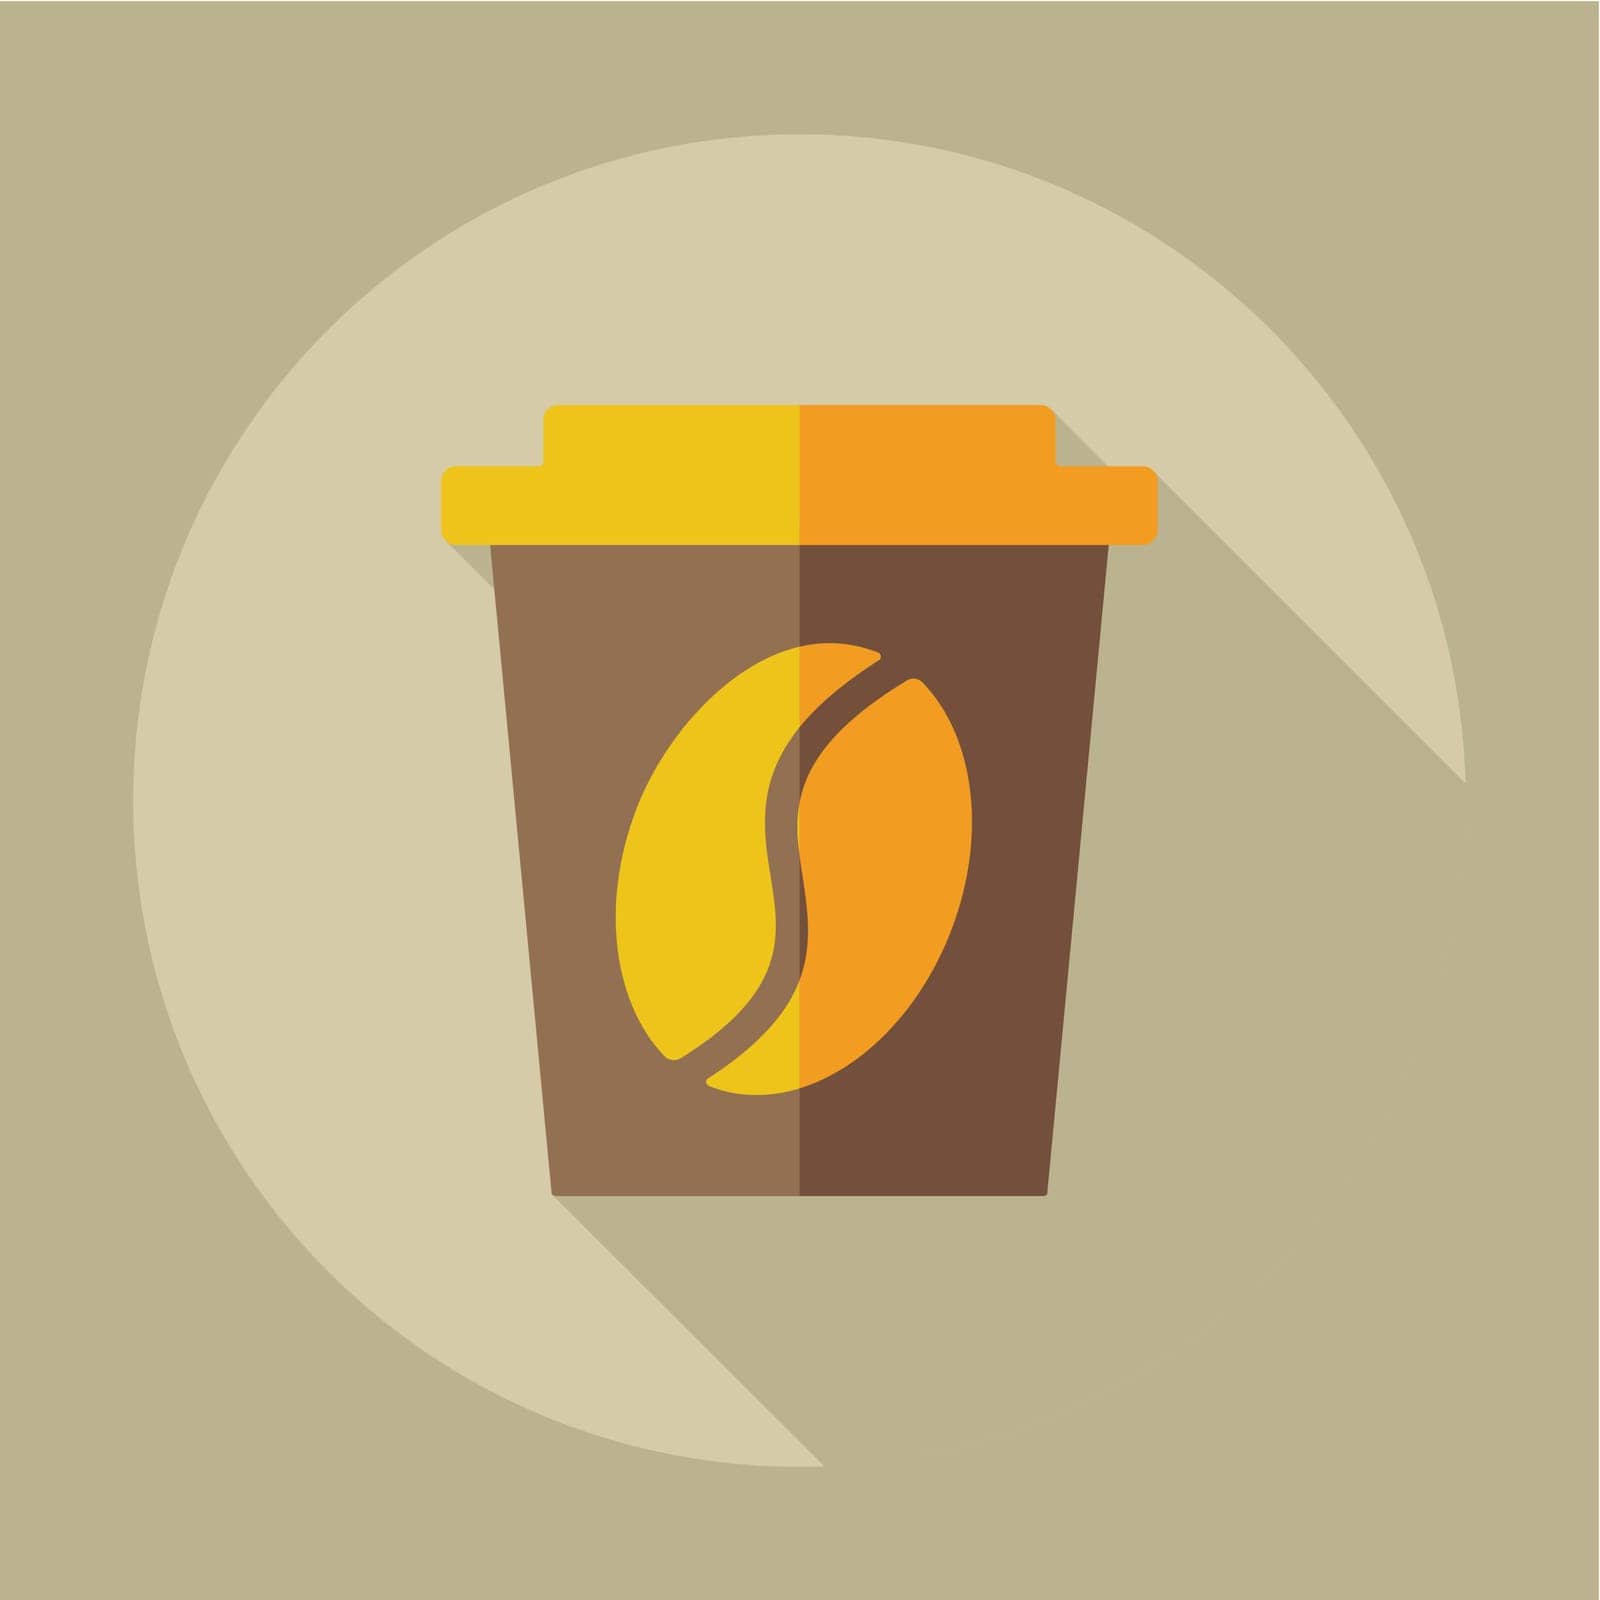 symbol,shadow,eps10,idea,icon,sign,isolated,cappuccino,mocha,hot,latte,tea,usability,modern,web,flat,design,beverage,vector,seo,graphic,bean,programming,app,espresso,art,set,business,social,restaurant,black,mobile,food,drink,badge,marketing,cafe,application,background,elements,coffee,silhouette,illustration,mug,working,optimization,cup by ogqcorp